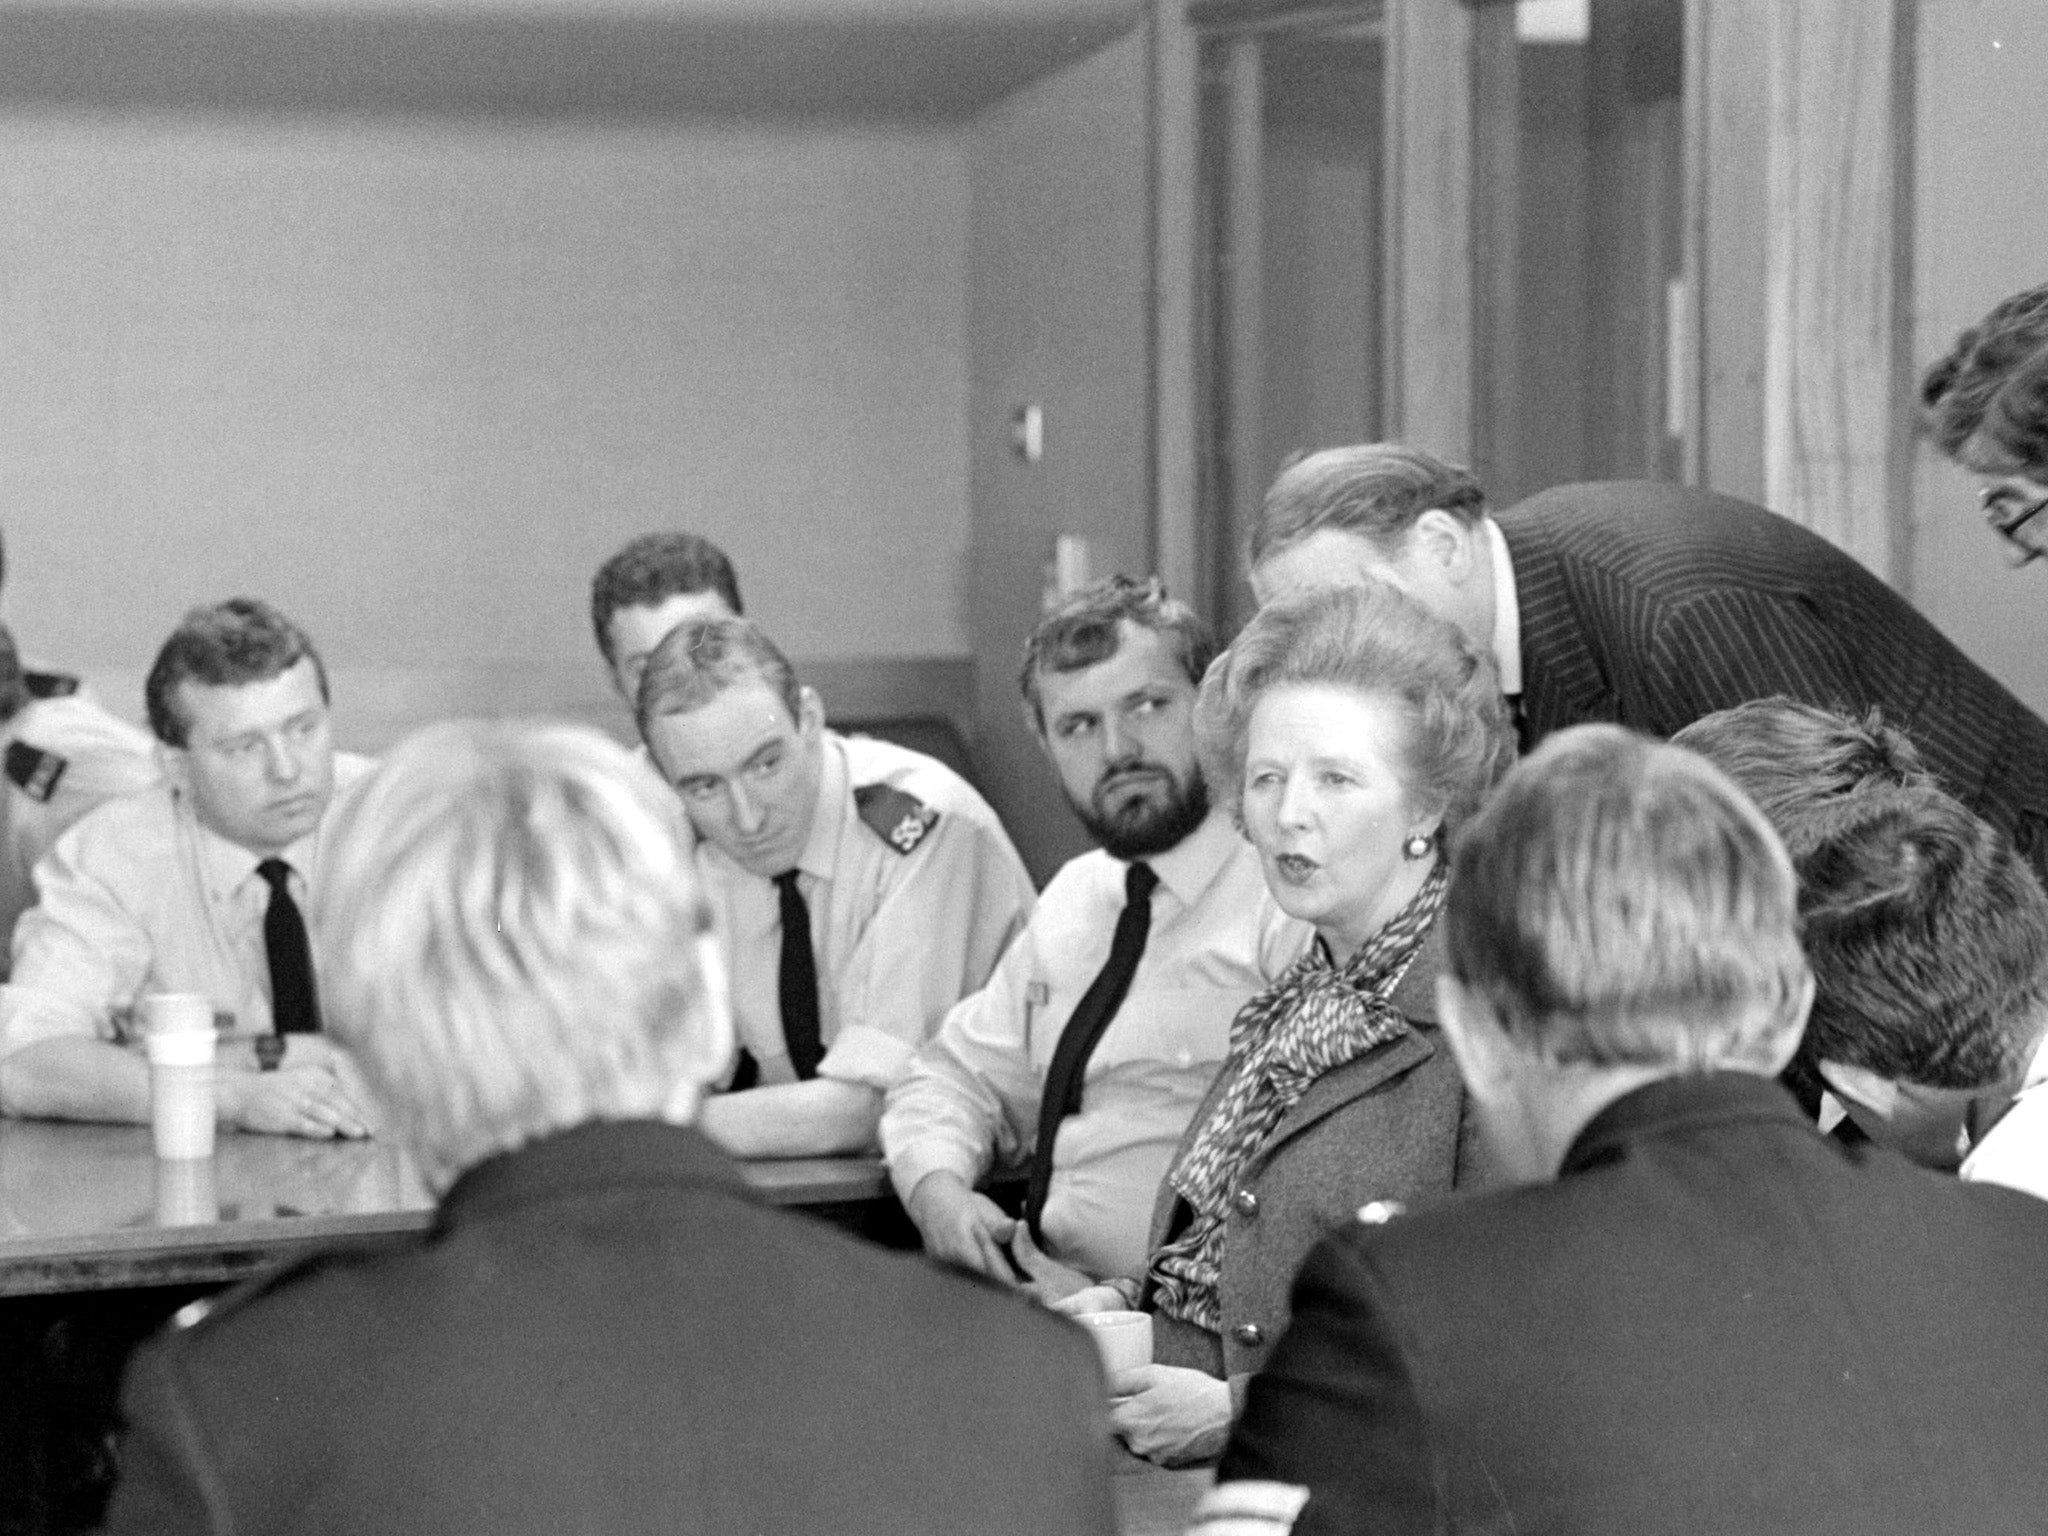 Margaret Thatcher in 1984 talking to officers in York who had been on picket duty during the miners’ strike